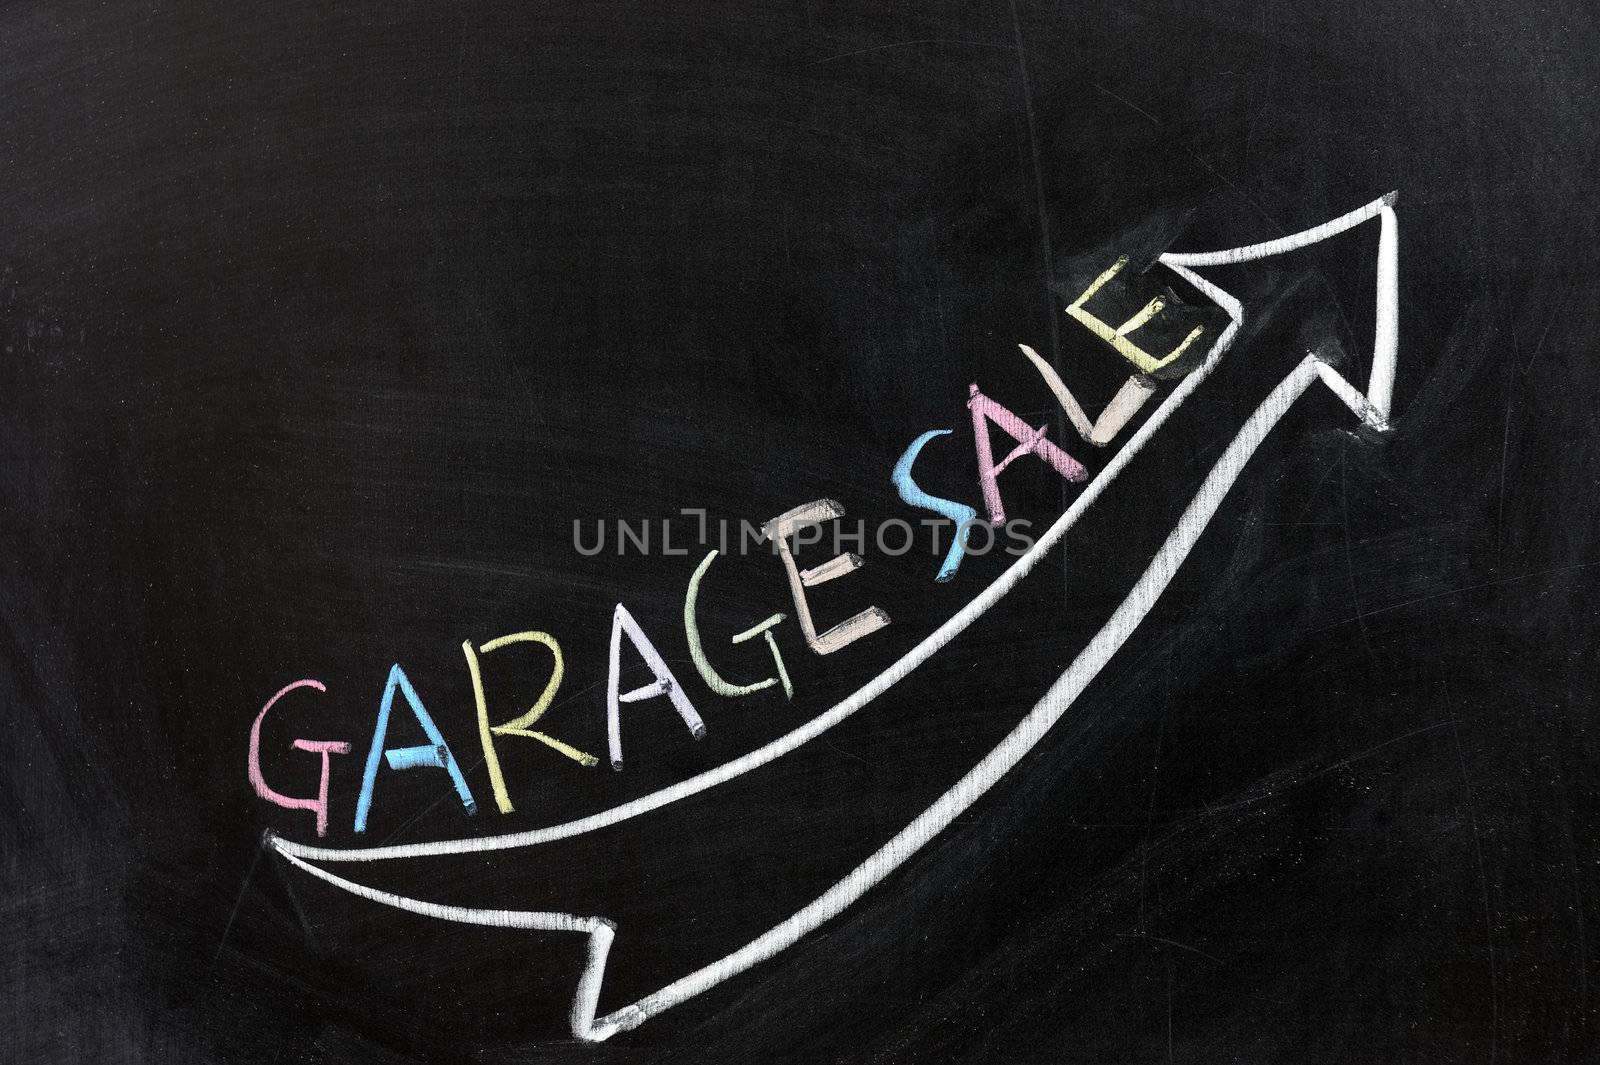 Conceptional chalk drawing - Garage sale